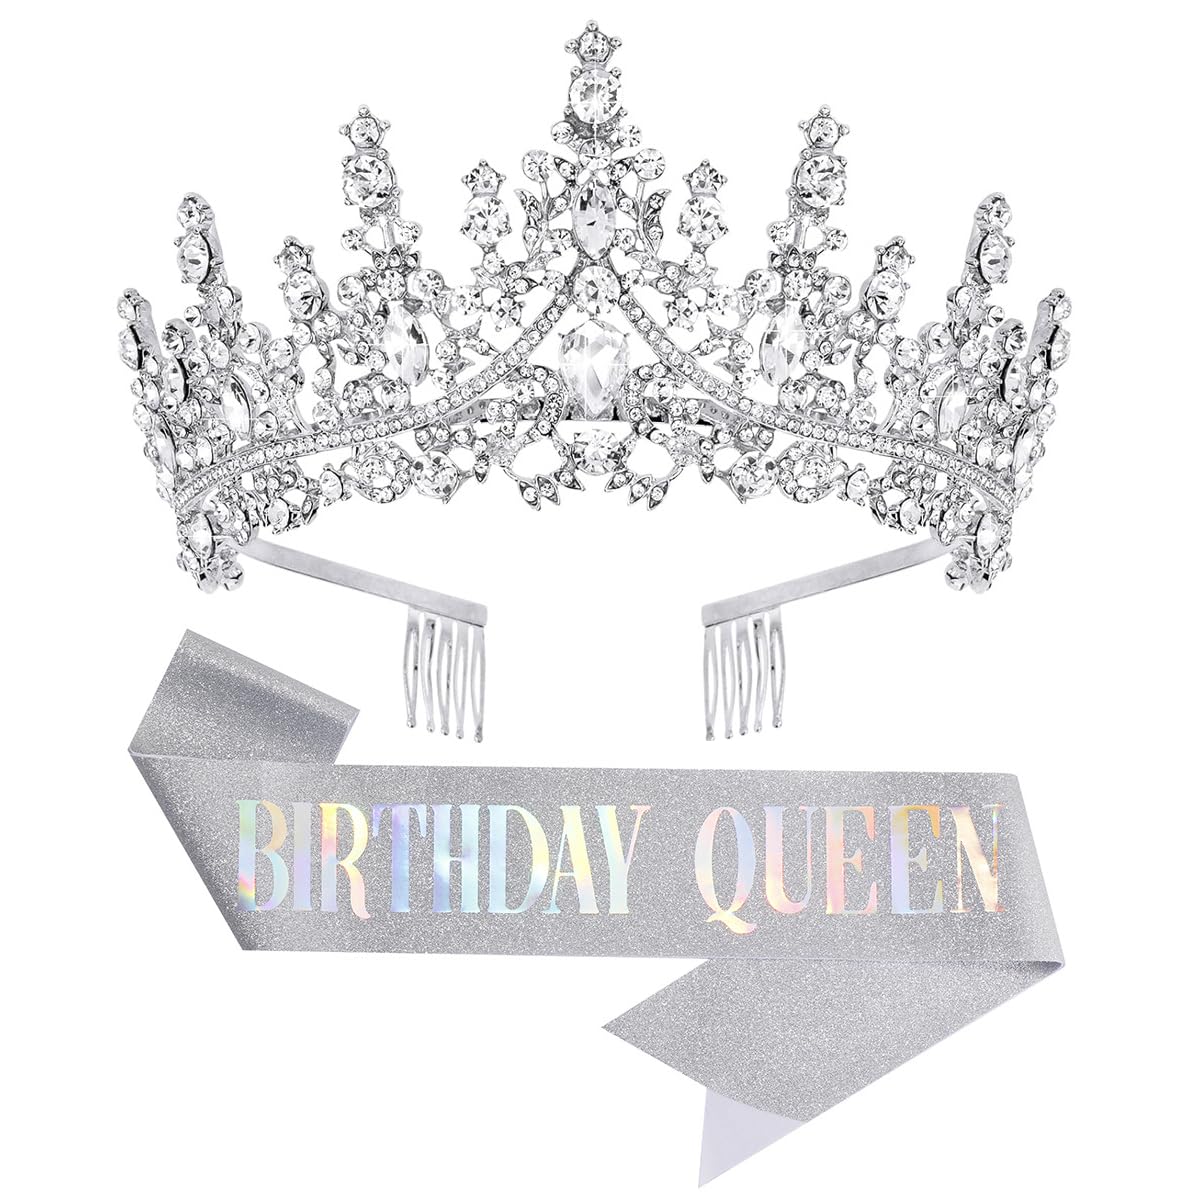 Papoopy Birthday Tiara Crown with Sash for Women and Girls, Headband Hair Accessories for Wedding Party Costume Silver